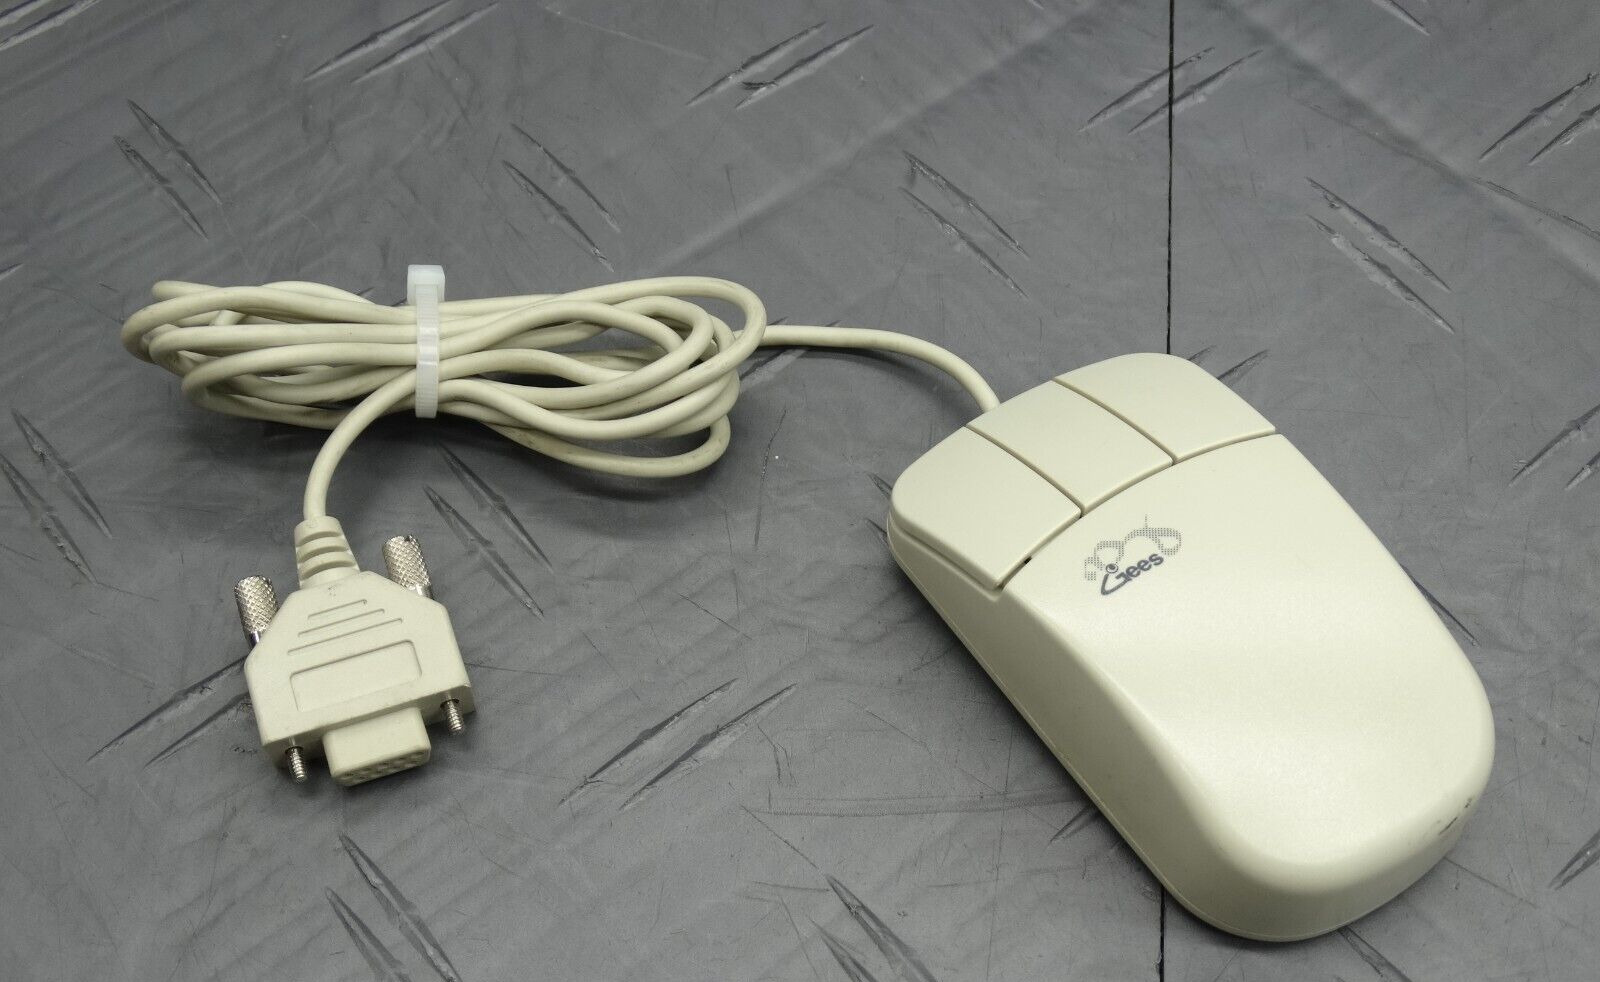 Giees Gees 3 Button MouseRARE VGA Mouse 1303 Computer Mainframe